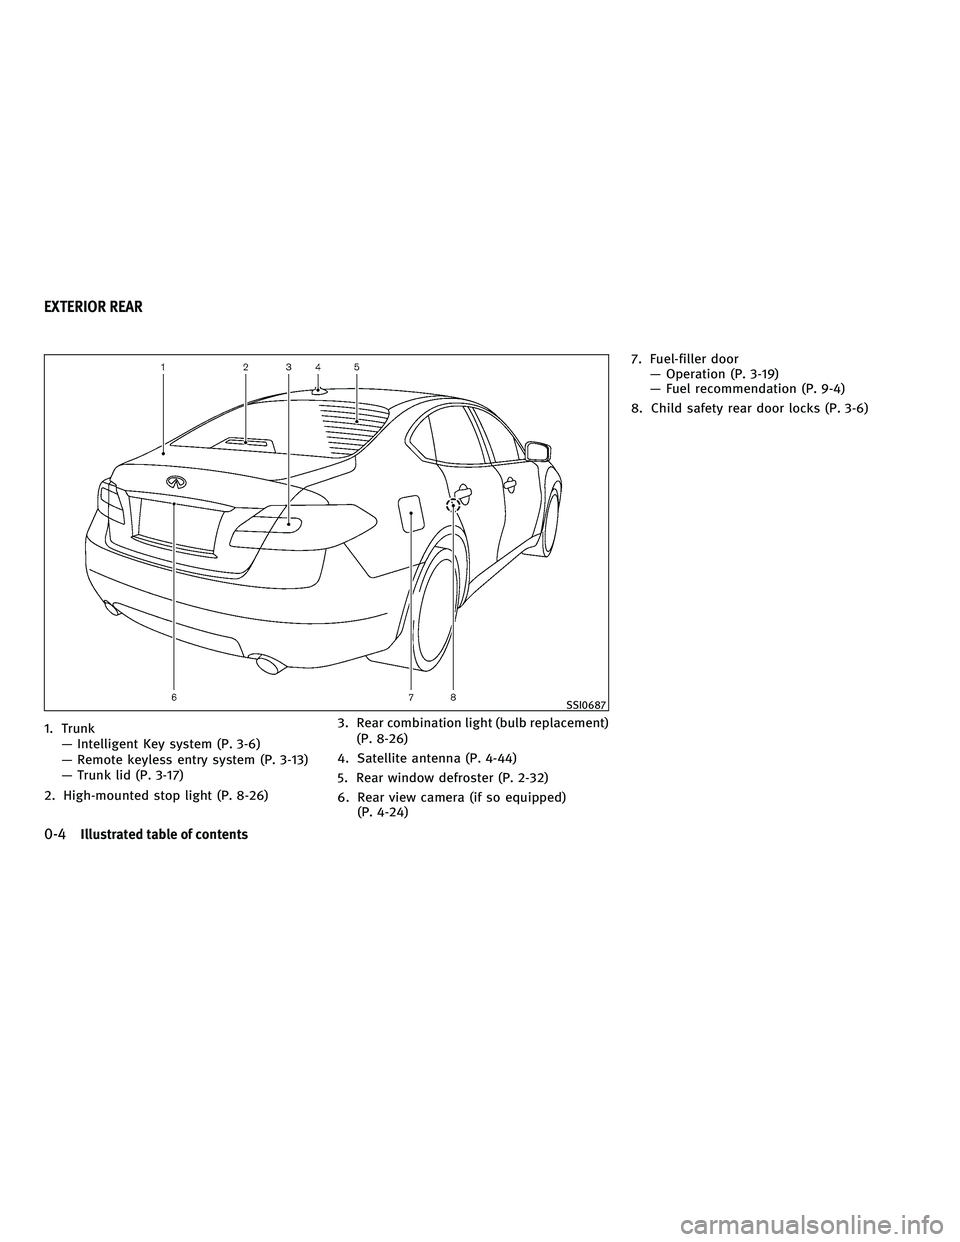 INFINITI M 2011  Owners Manual 1. Trunk— Intelligent Key system (P. 3-6)
— Remote keyless entry system (P. 3-13)
— Trunk lid (P. 3-17)
2. High-mounted stop light (P. 8-26) 3. Rear combination light (bulb replacement)
(P. 8-26